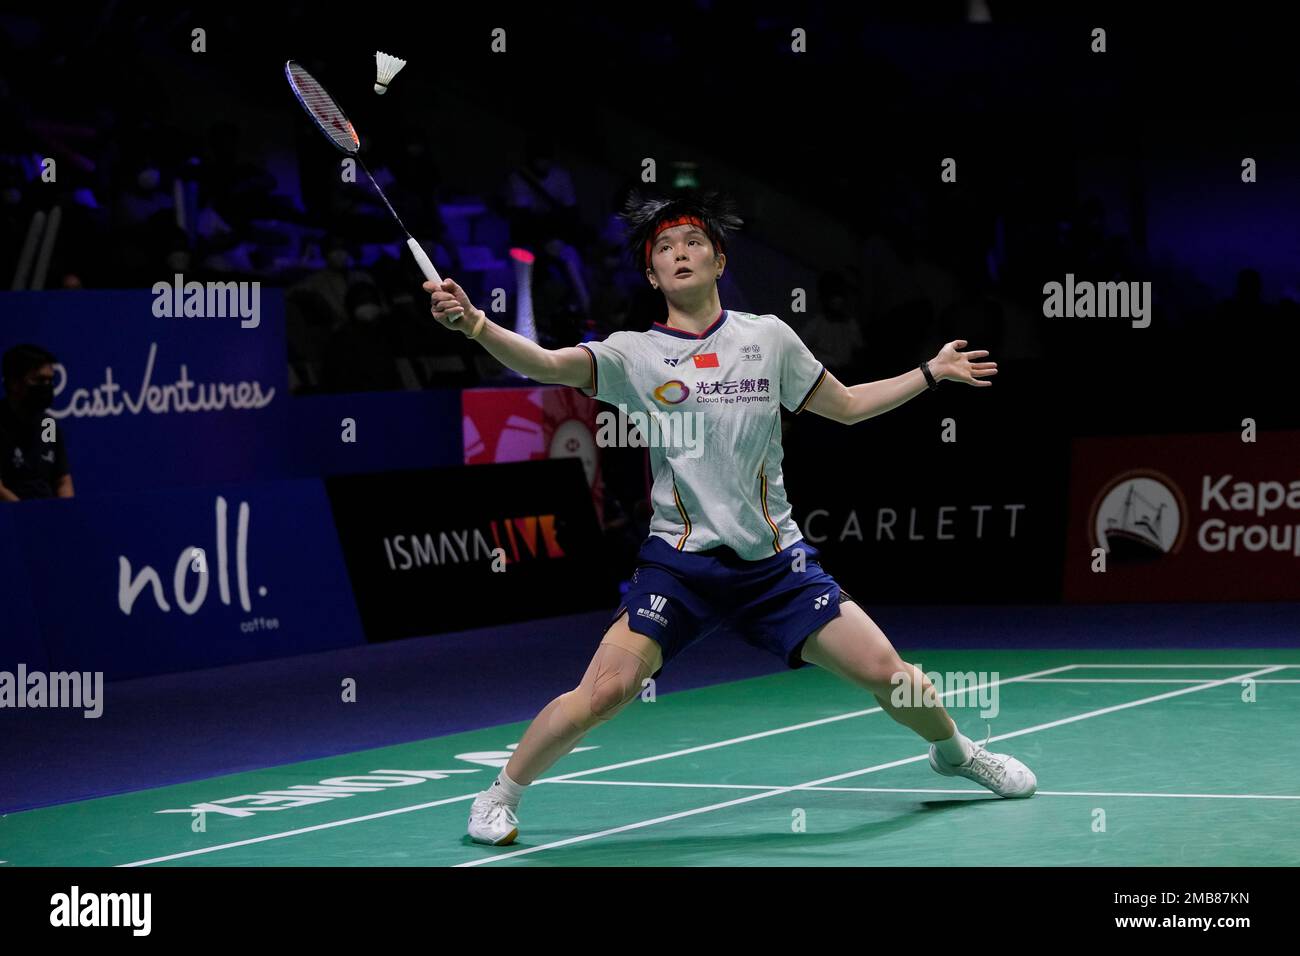 Chinas Wang Zhi Yi plays a shot against her compatriot He Bing Jiao during their womens singles semifinal match at Indonesia Open badminton tournament at Istora Gelora Bung Karno Stadium in Jakarta,